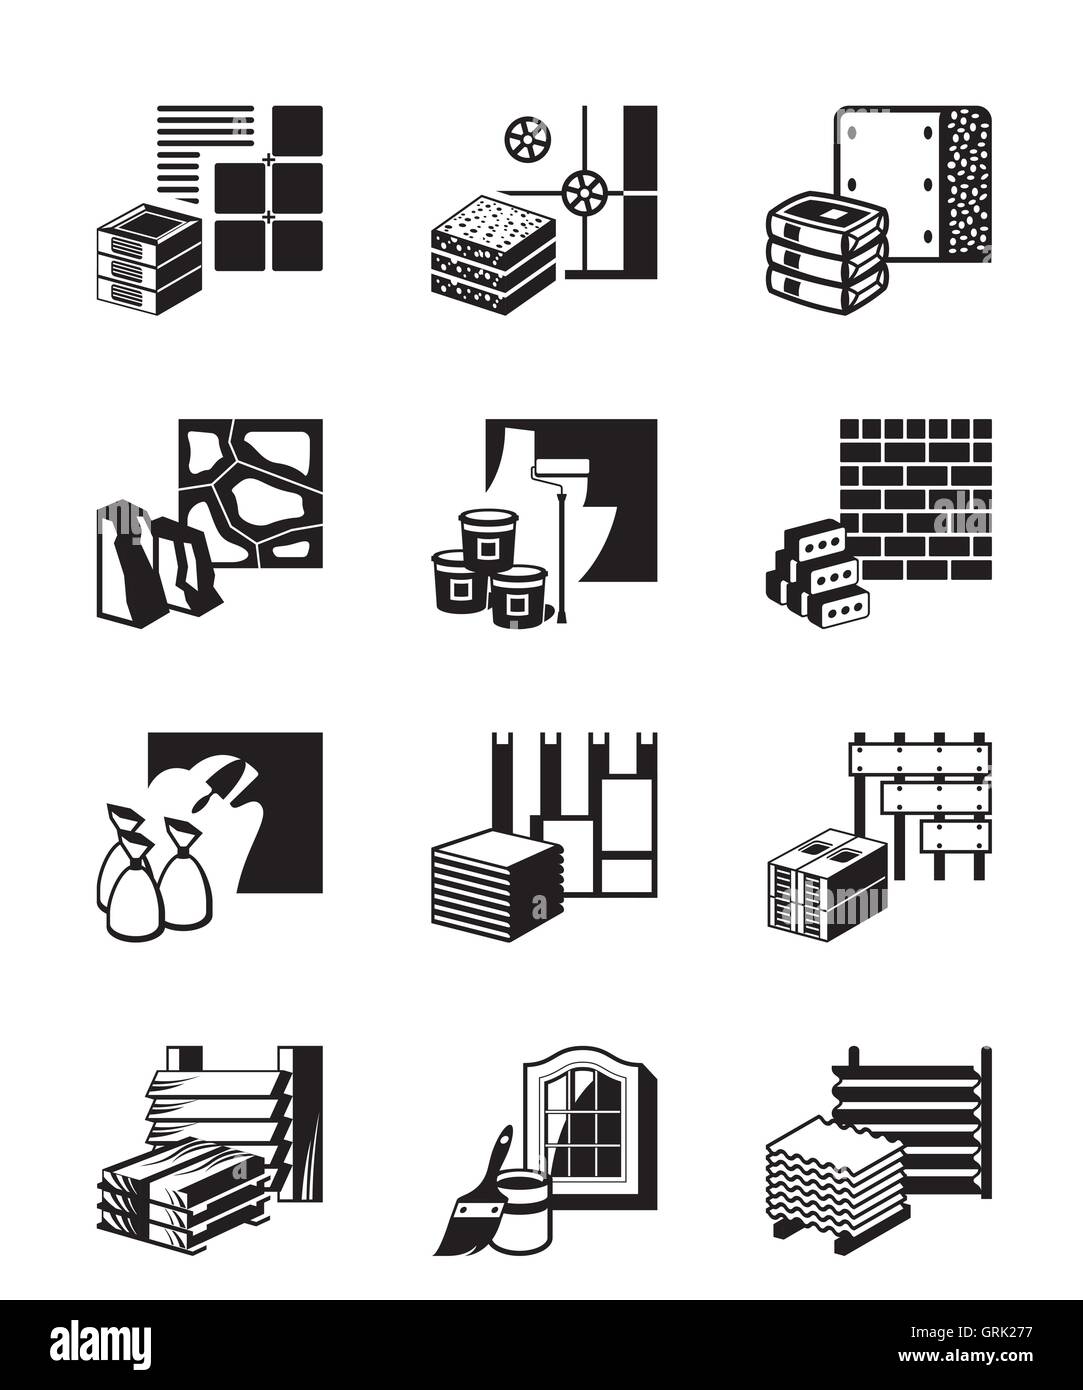 Construction materials and building details - vector illustration Stock Vector